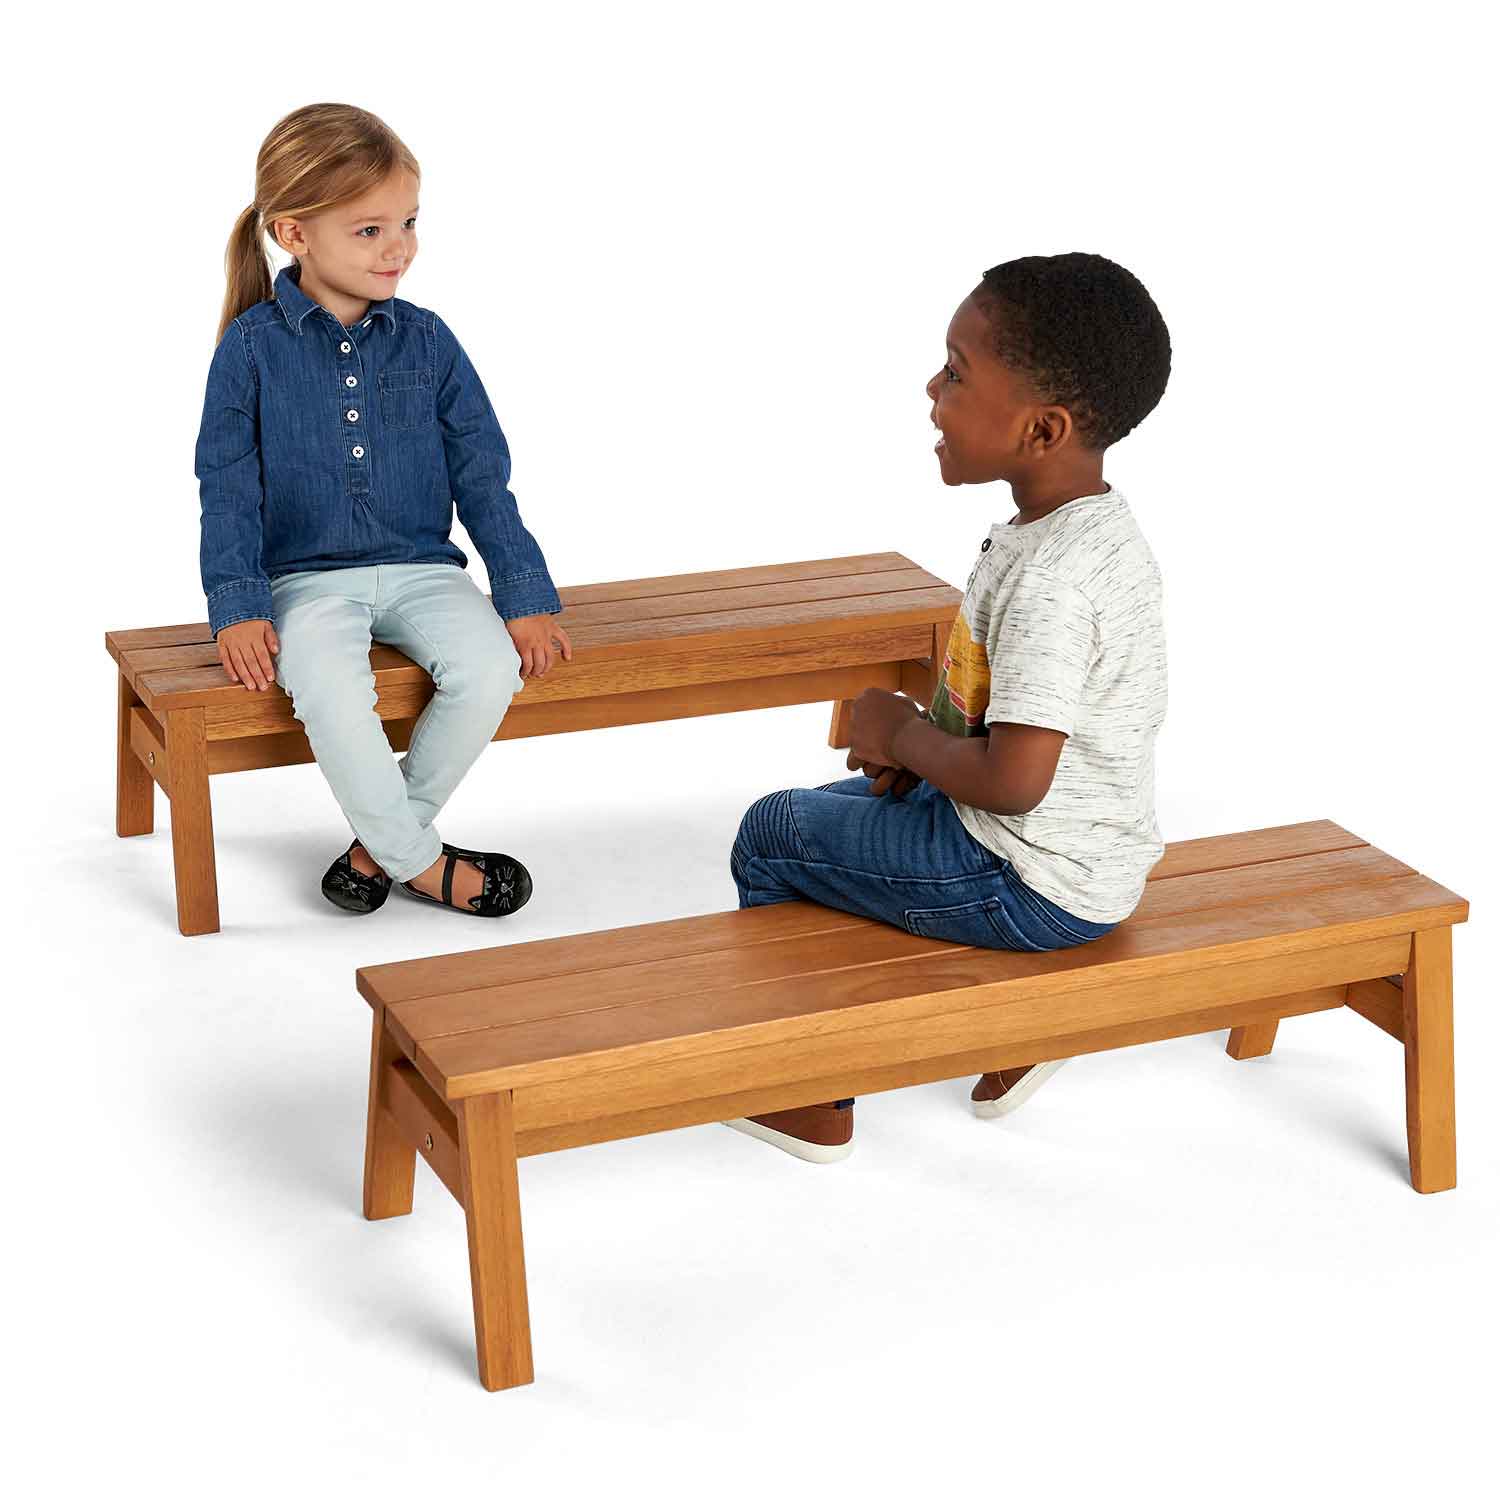 Outdoor Wooden Benches